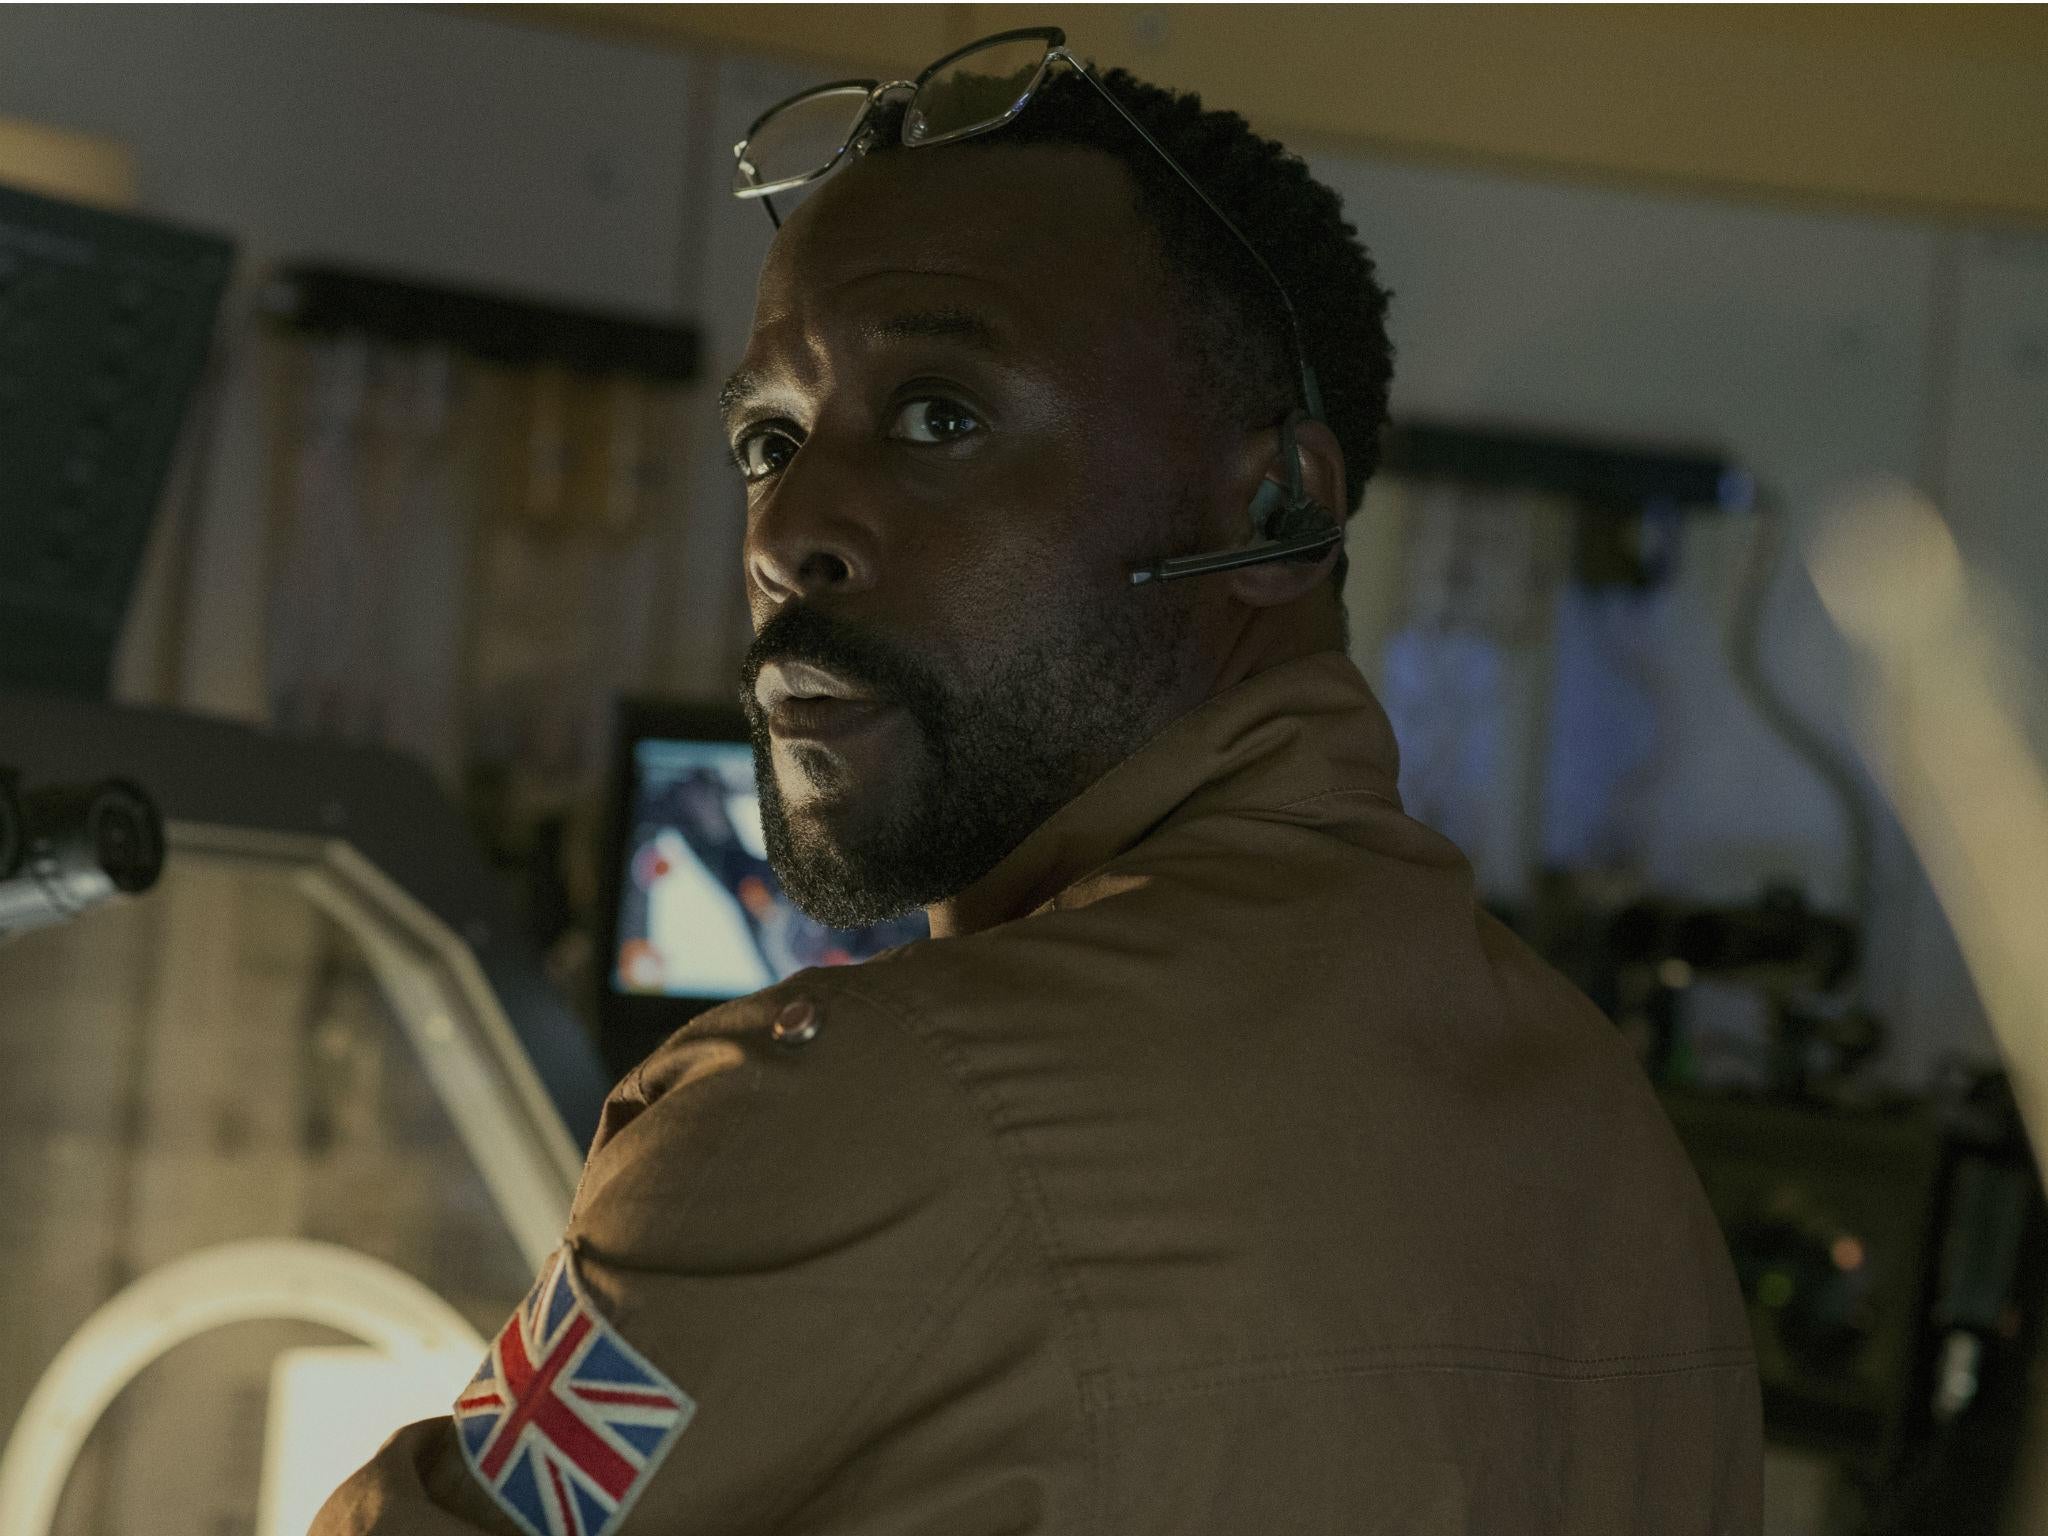 British actor Ariyon Bakare who stars as Derry in the new sci-fi film 'Life'